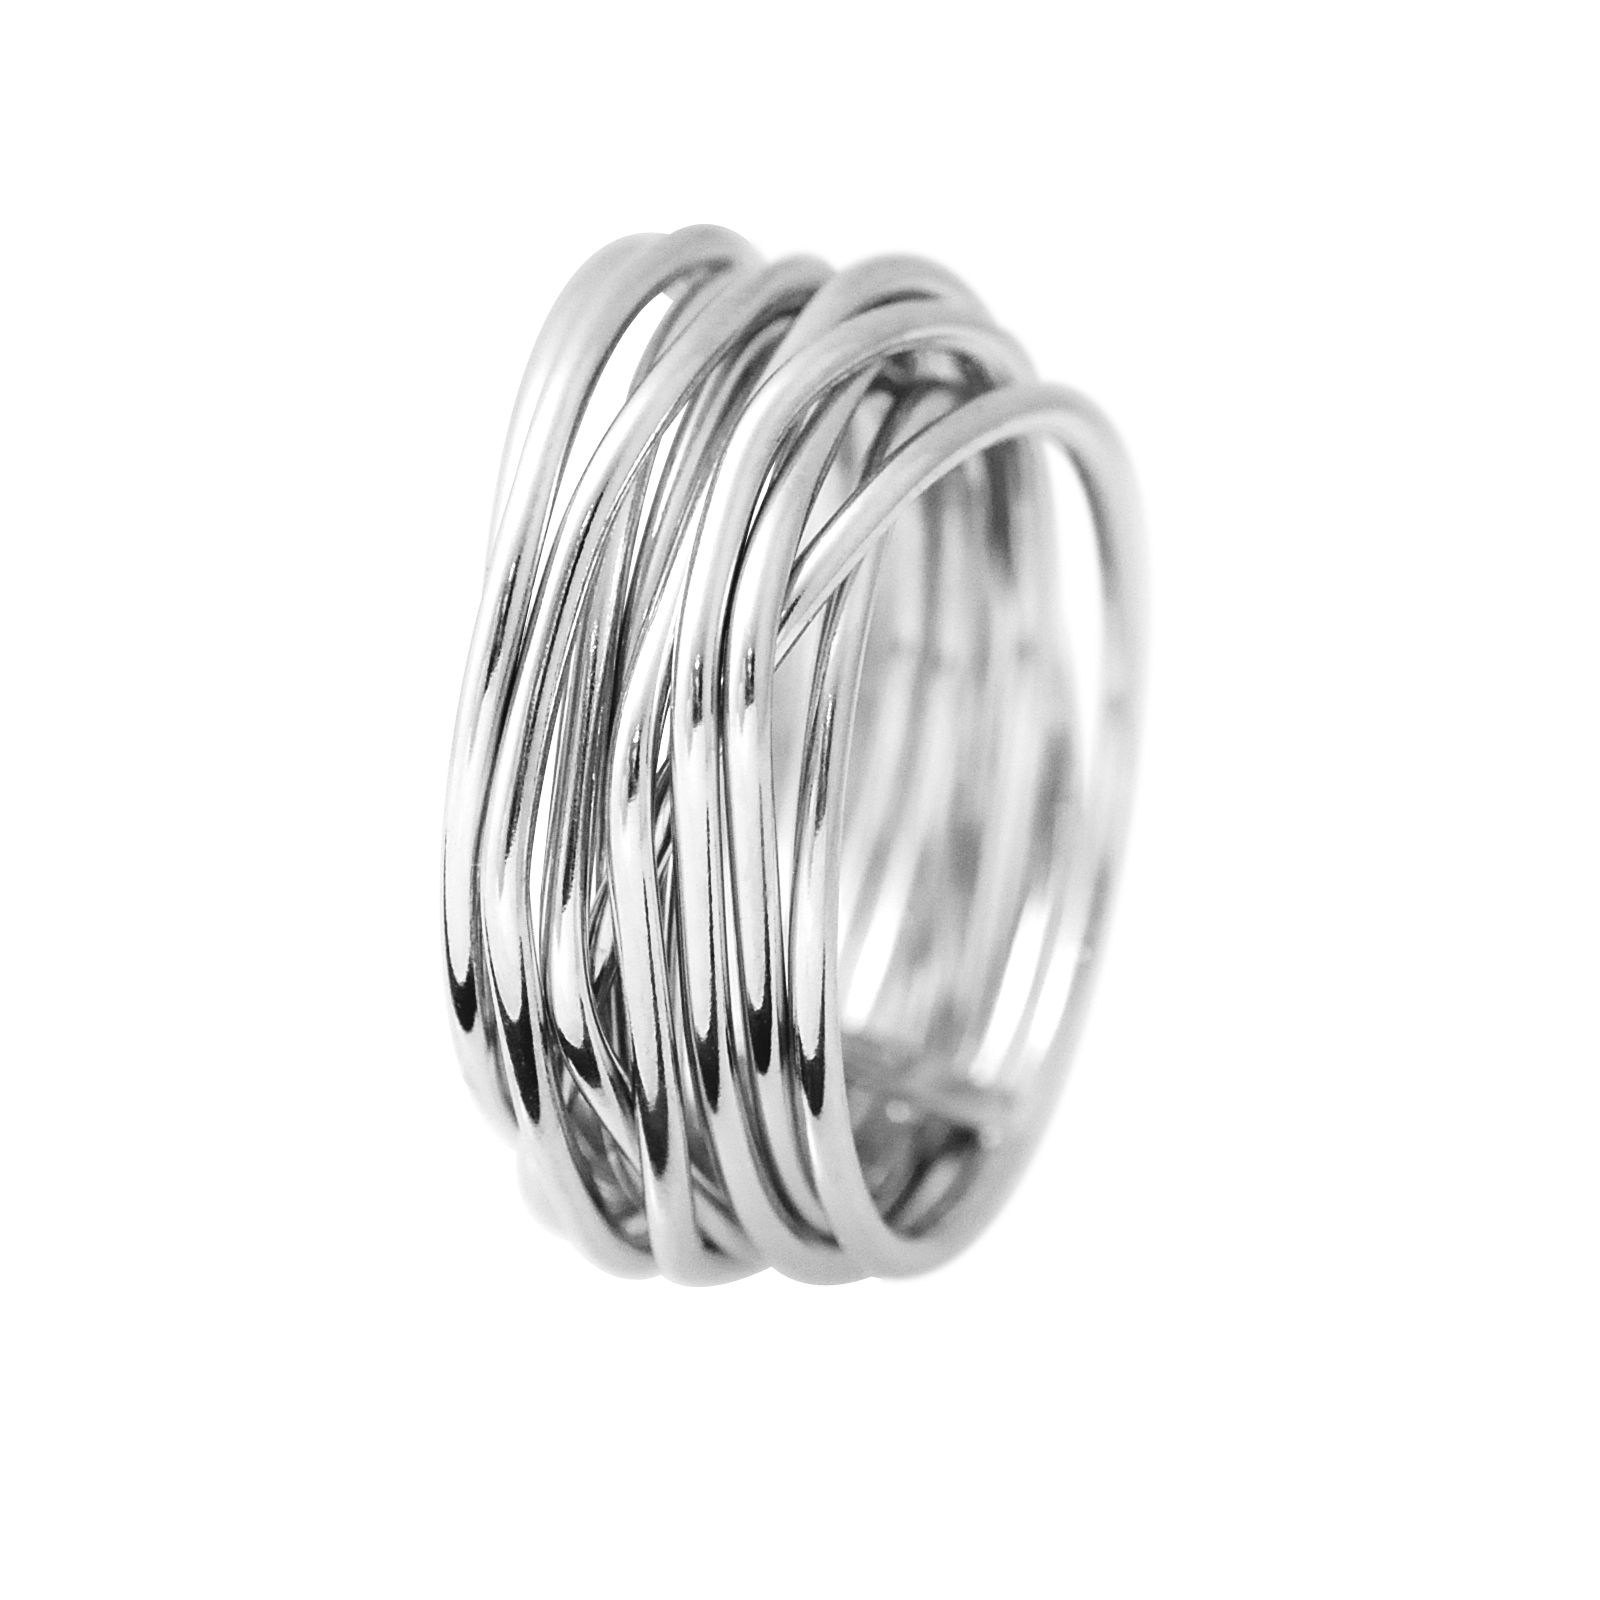 Ring Fashion - 925 Sterling Silver Rhodium Plated - Our jewellery is made in France and will be delivered in a gift box accompanied by a Certificate of Authenticity and International Warranty